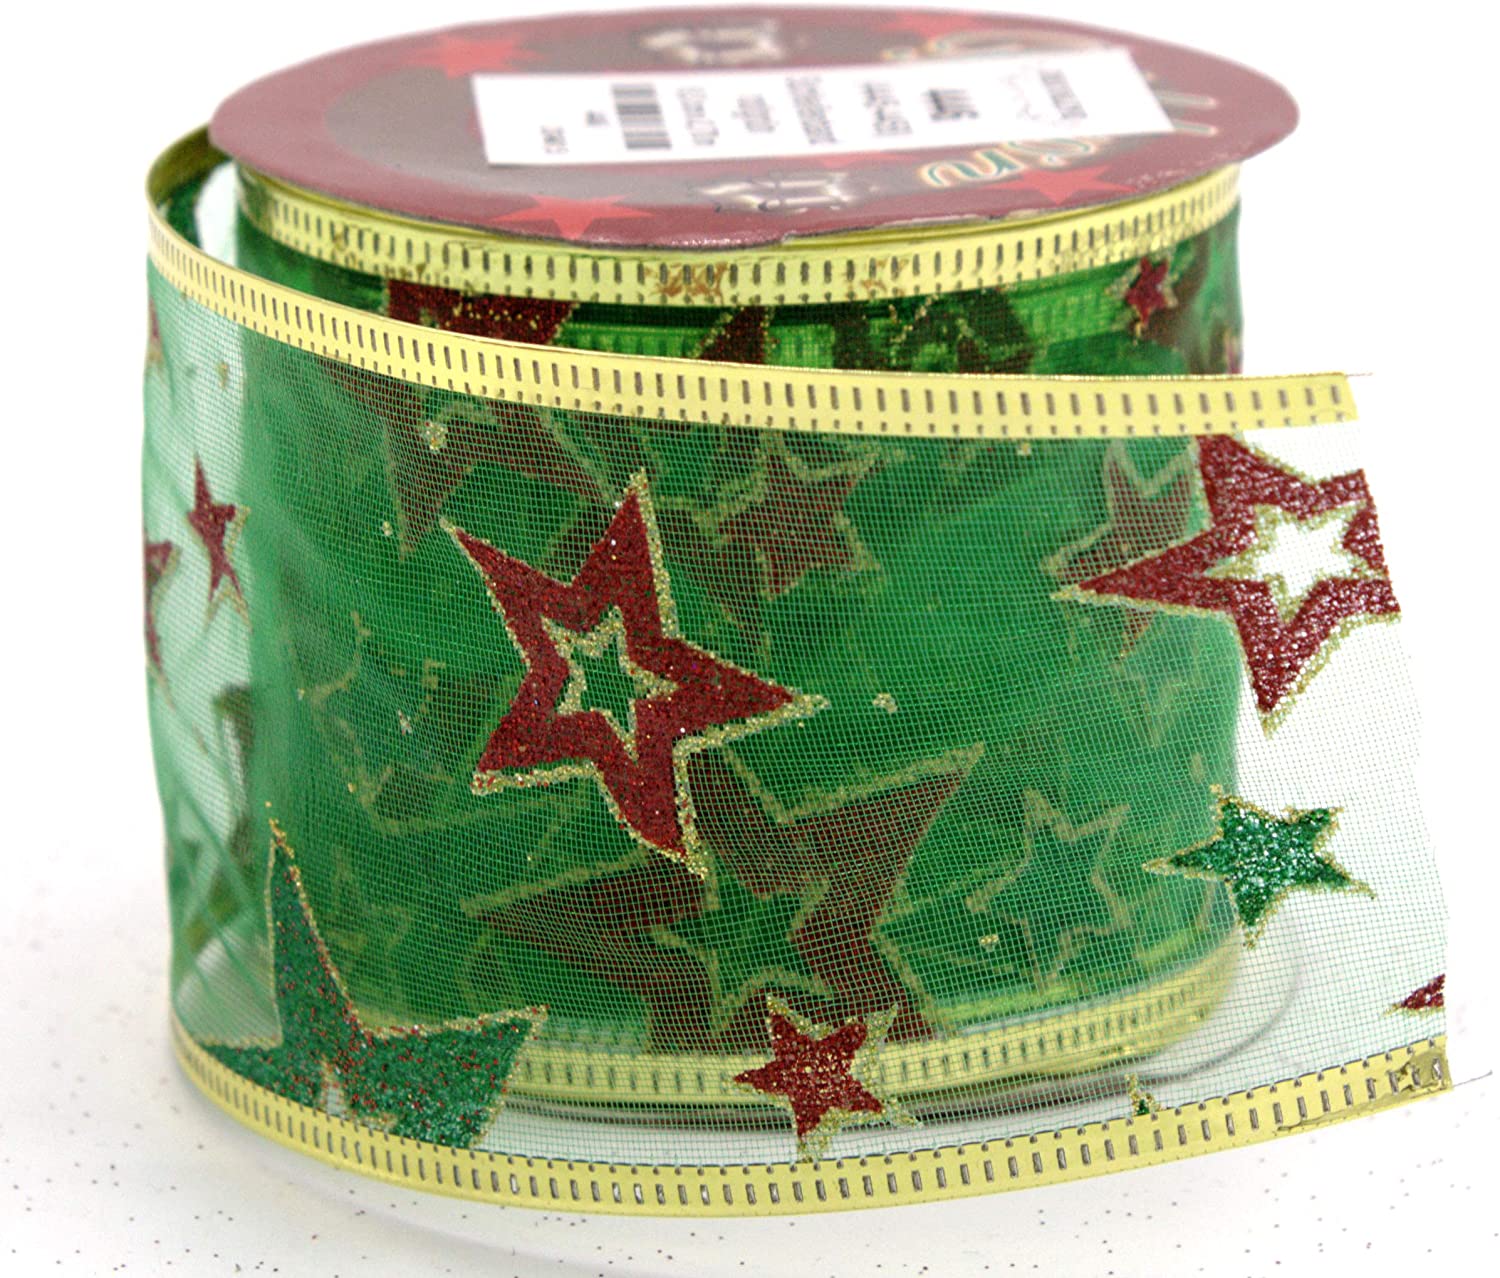 Daro Decorative Fabric Ribbon 6.3 Cm X 2.7 M In Red Or Green - 1 Piece Or 3